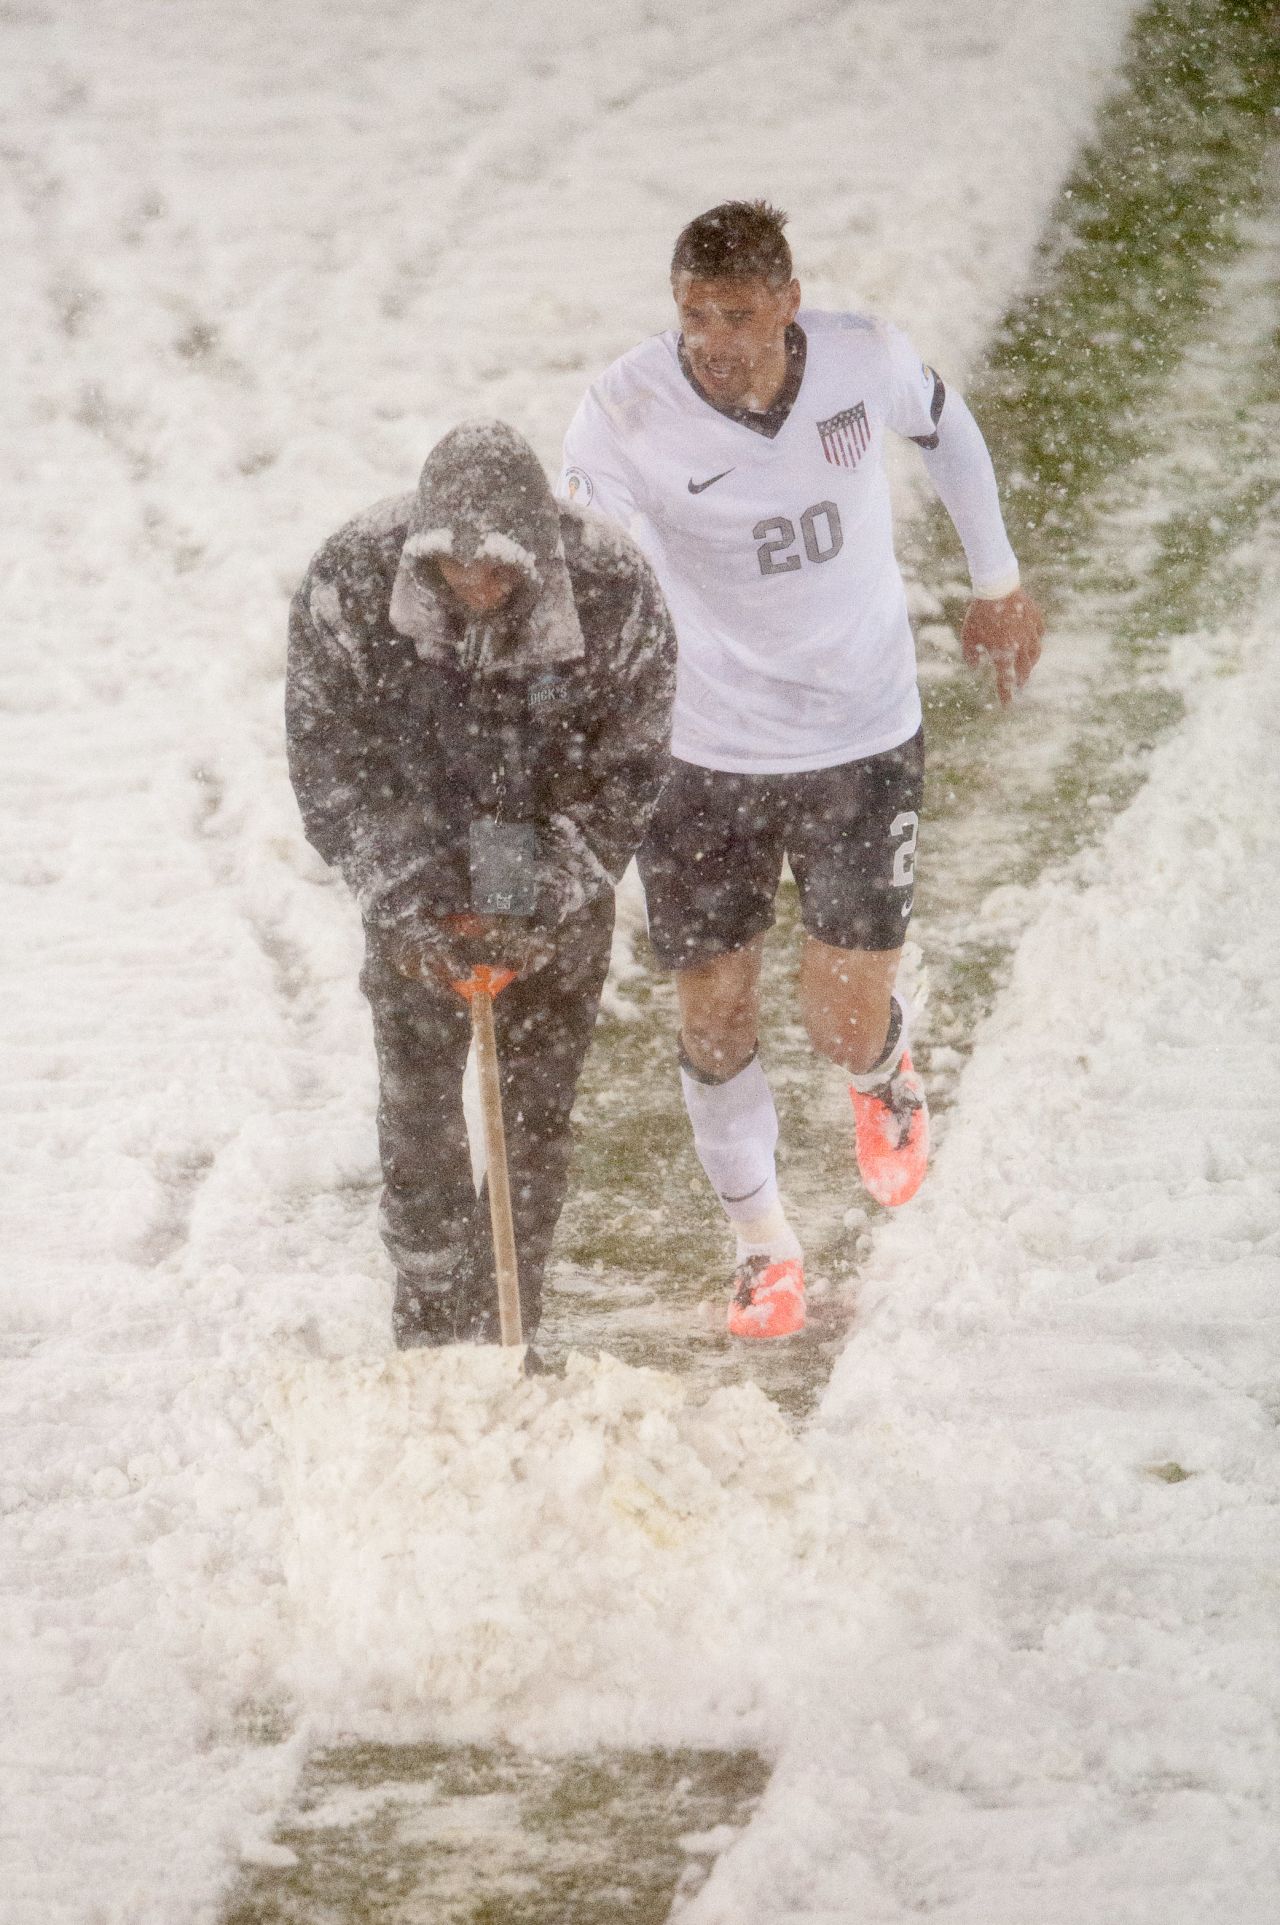 U.S. midfielder Geoff Cameron lends a hand as an official attempts to clear snow off the pitch markings.